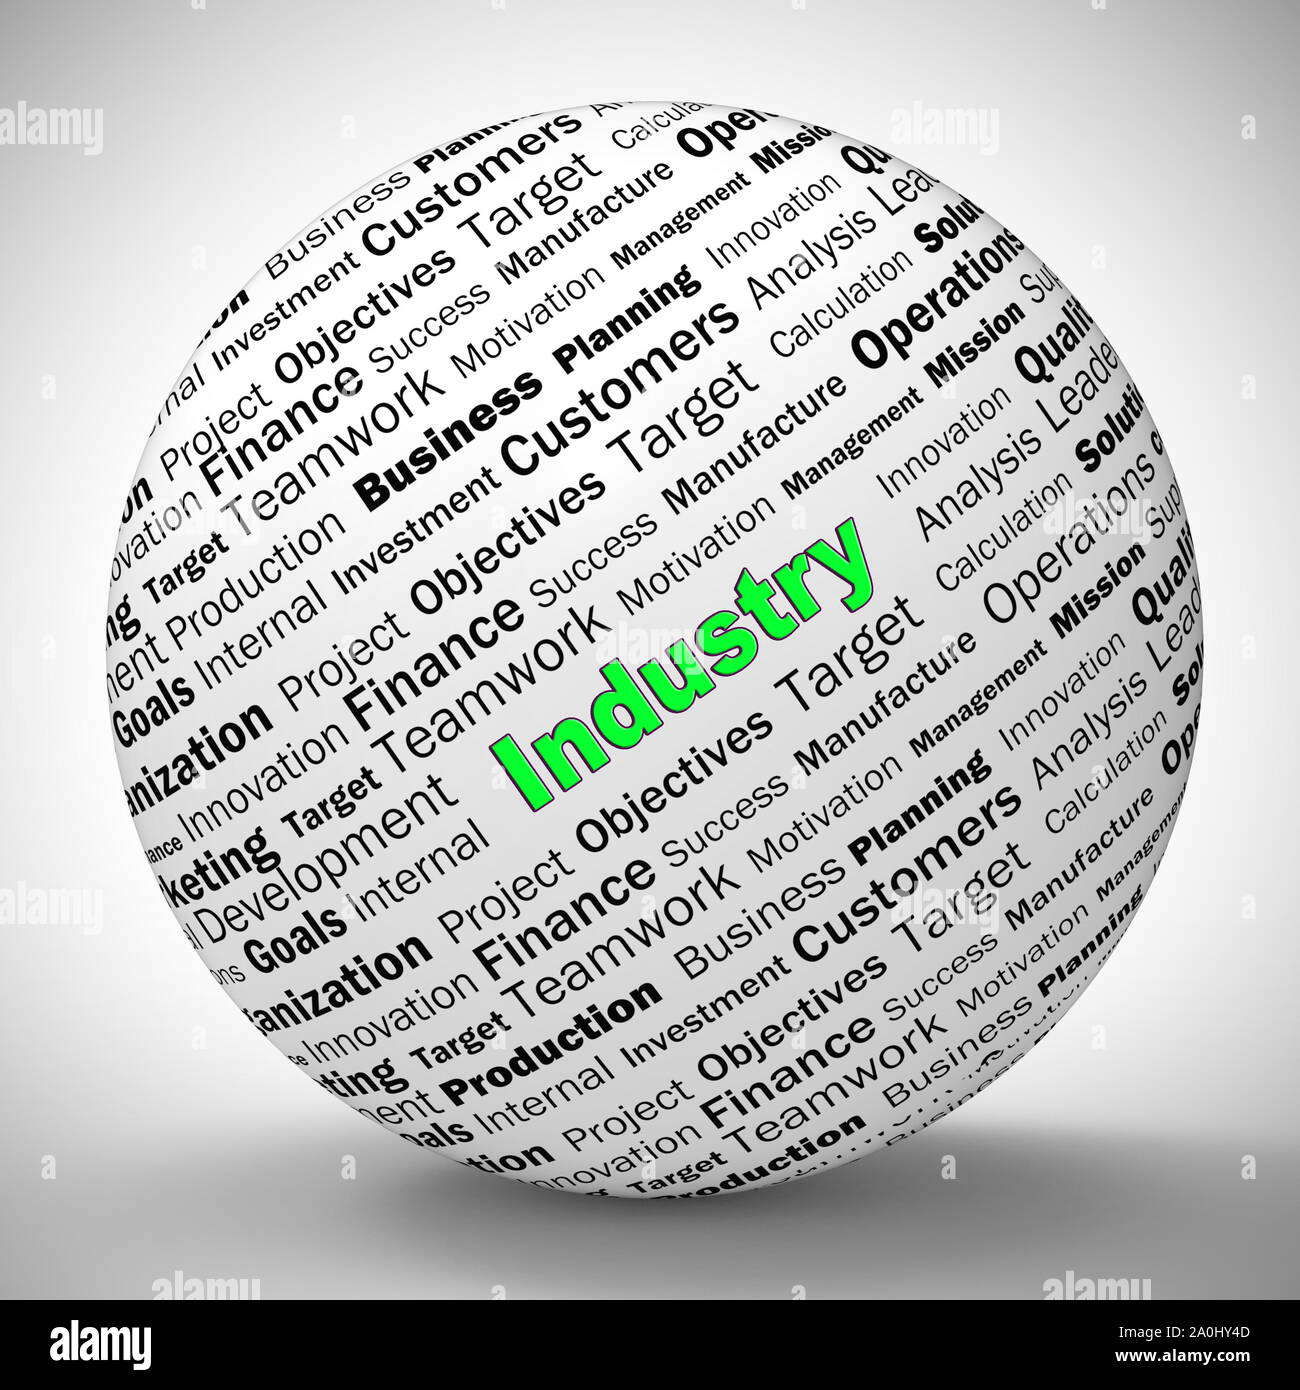 Industry concept icon means trade and manufacturing. Company production and industrial concerns - 3d illustration Stock Photo